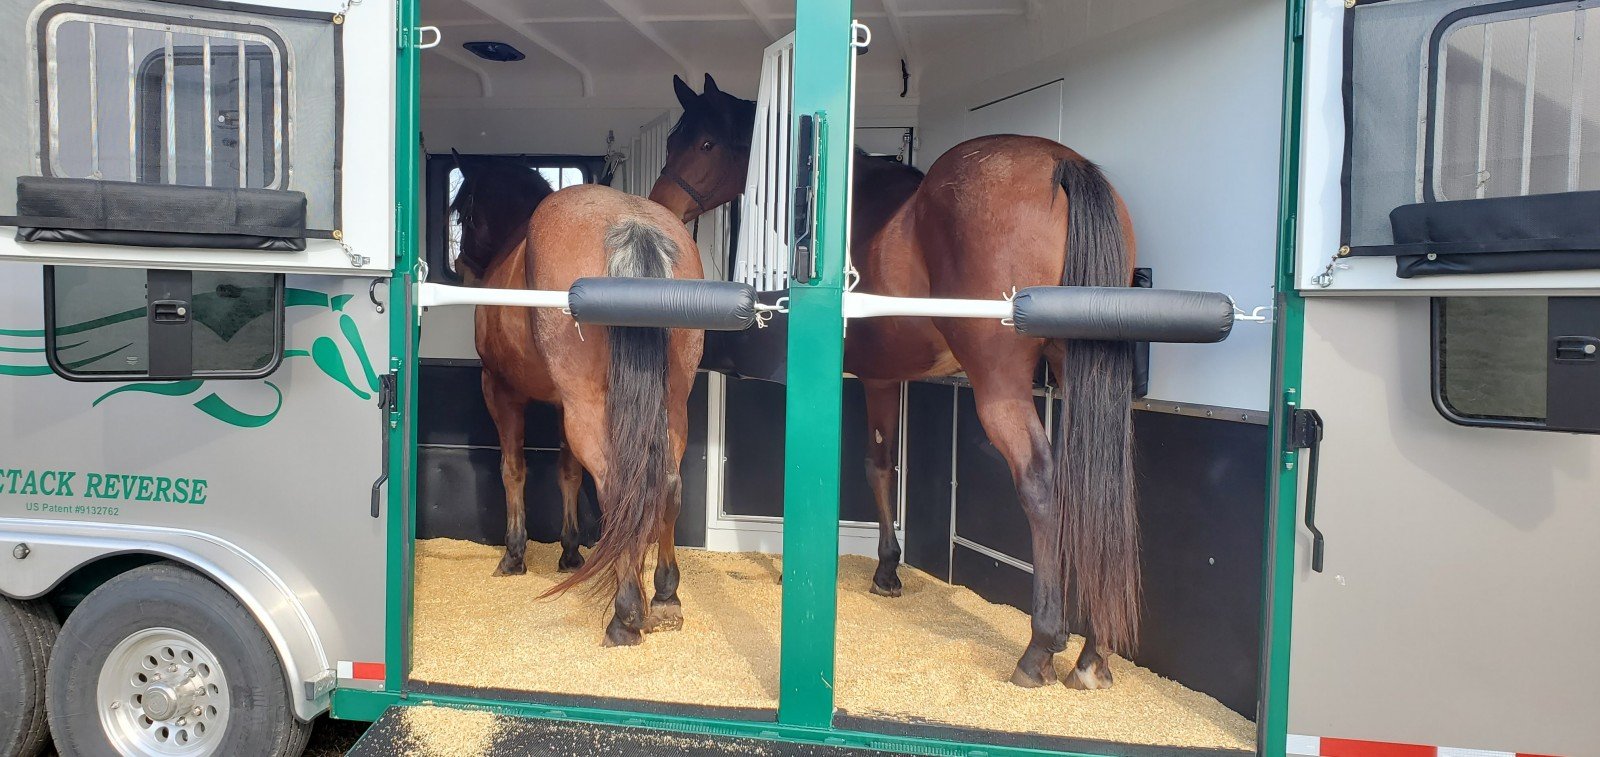 Two horses loaded onto a Double D horse trailer. 